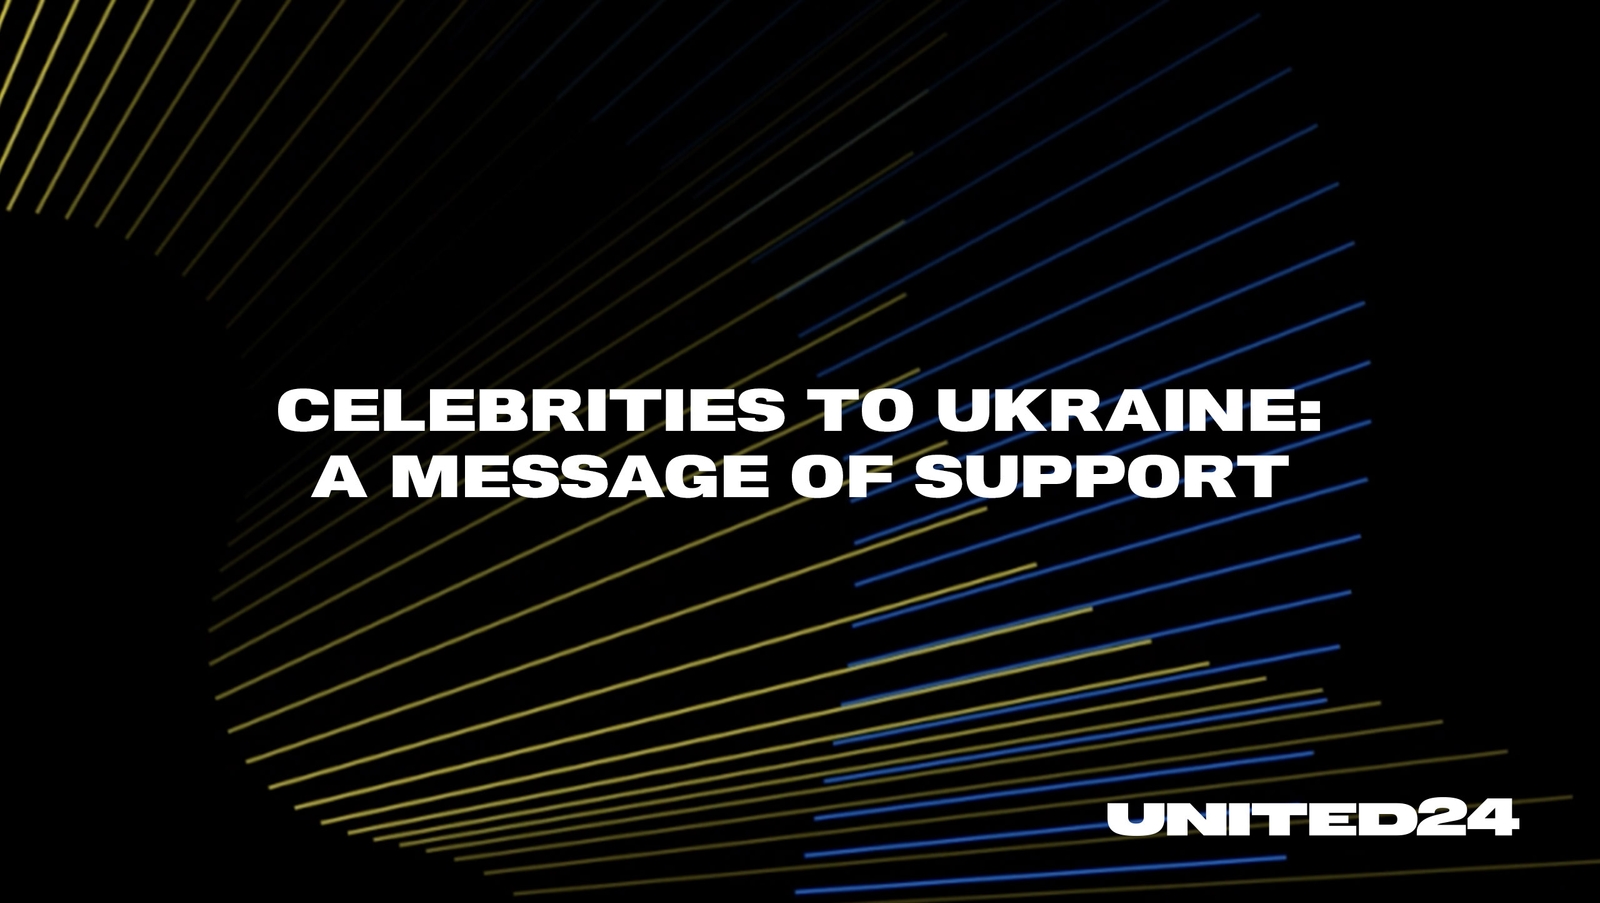 More Than 30 World Stars Have Addressed Ukrainians With Words of Support